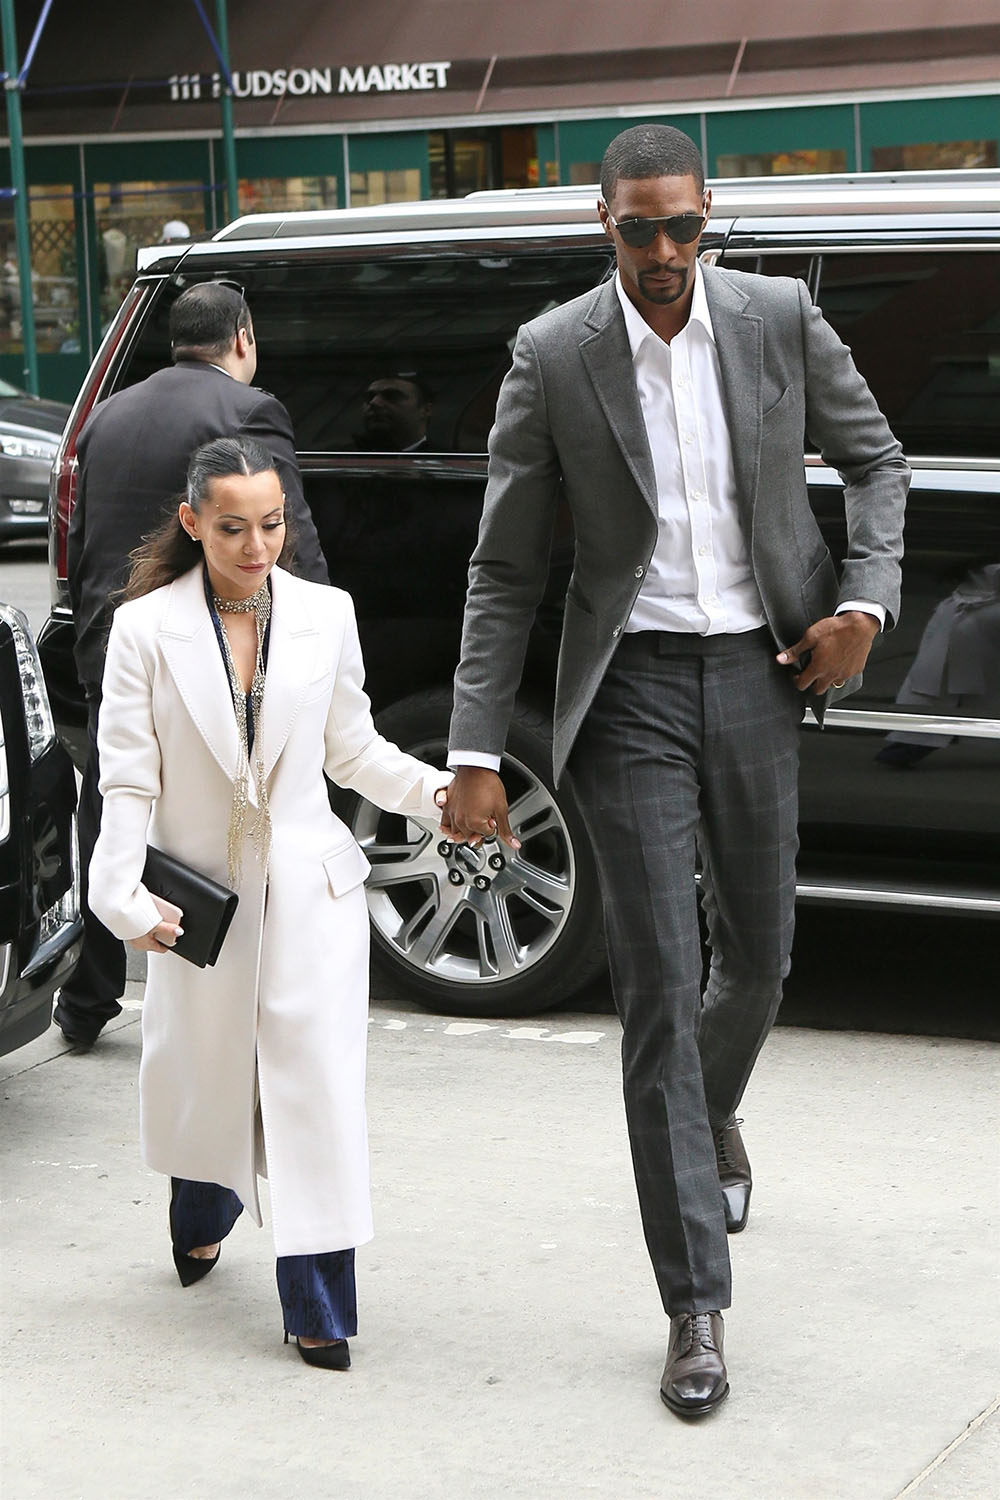 Chris Bosh and wife Adrienne enjoy lunch at Bubby's before hearing to Roc Nation brunch in NYC